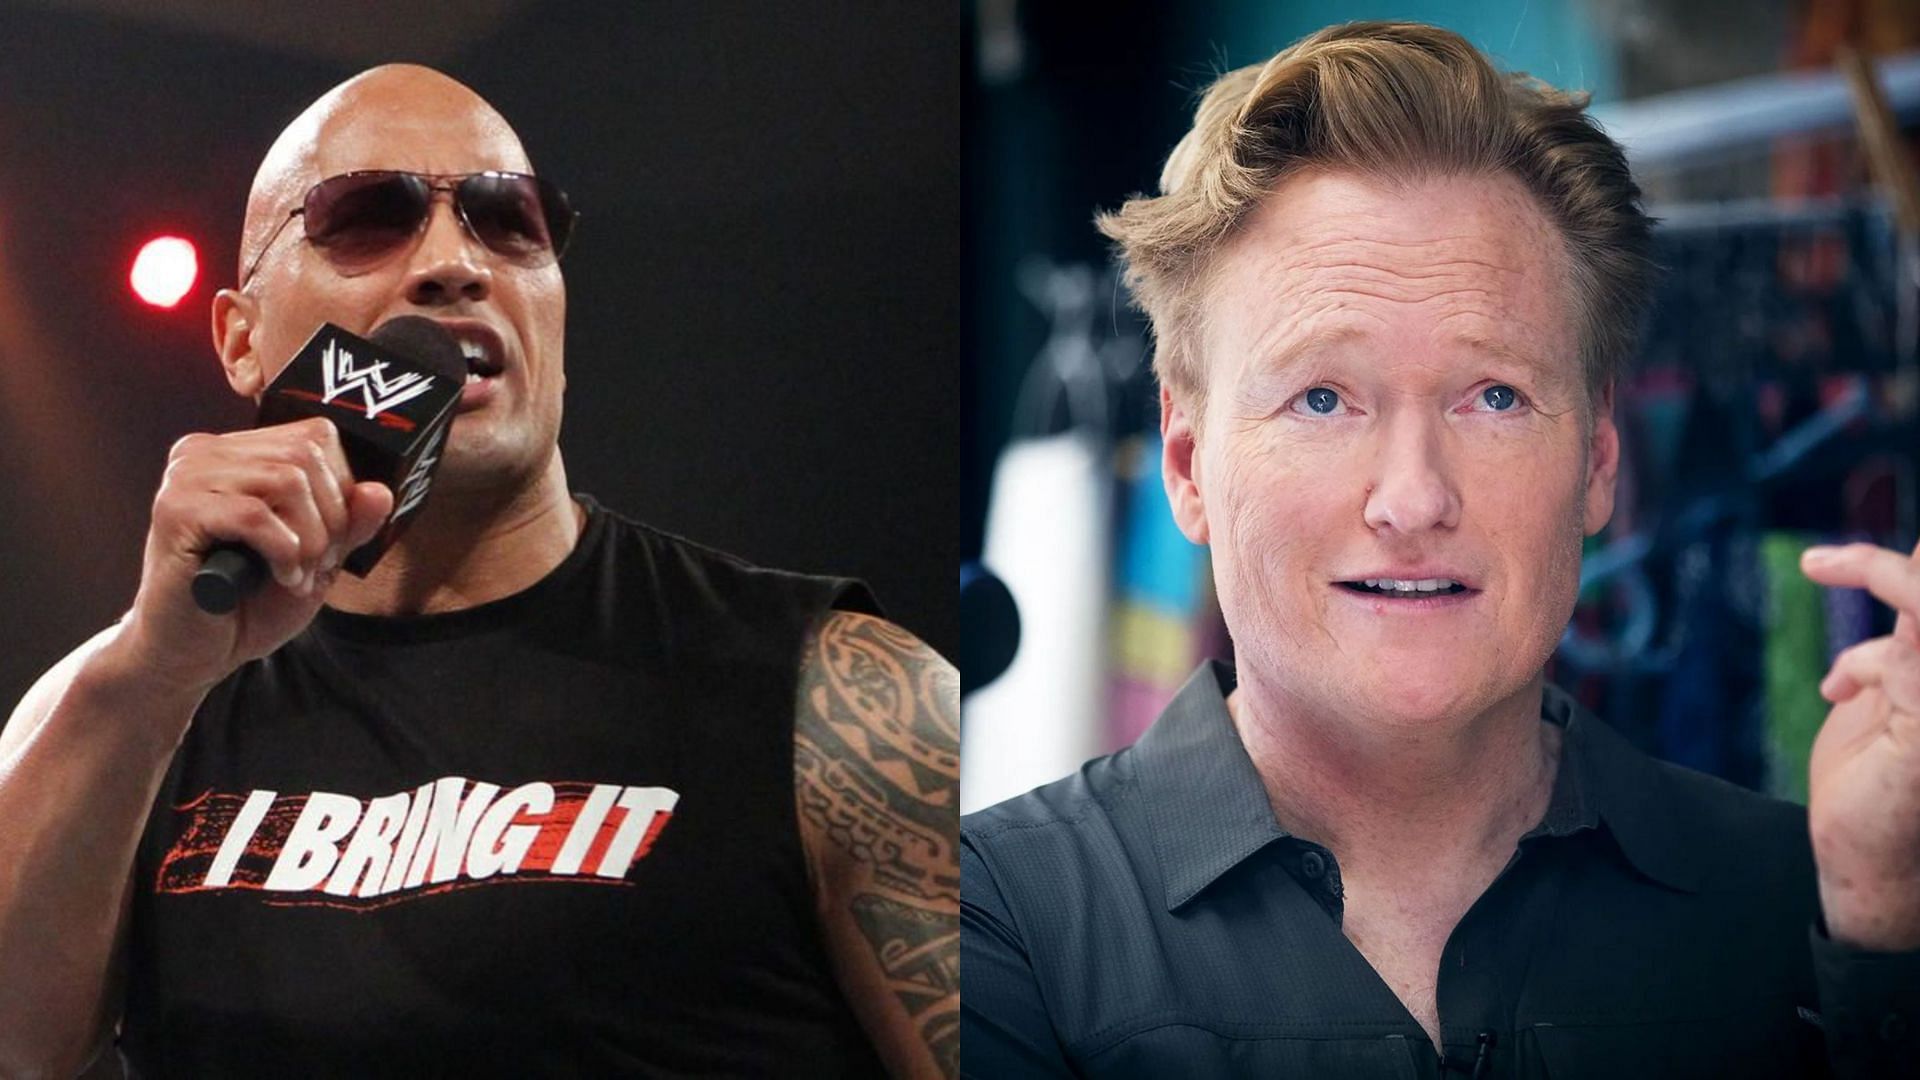 WWE legend The Rock (left) and Conan O